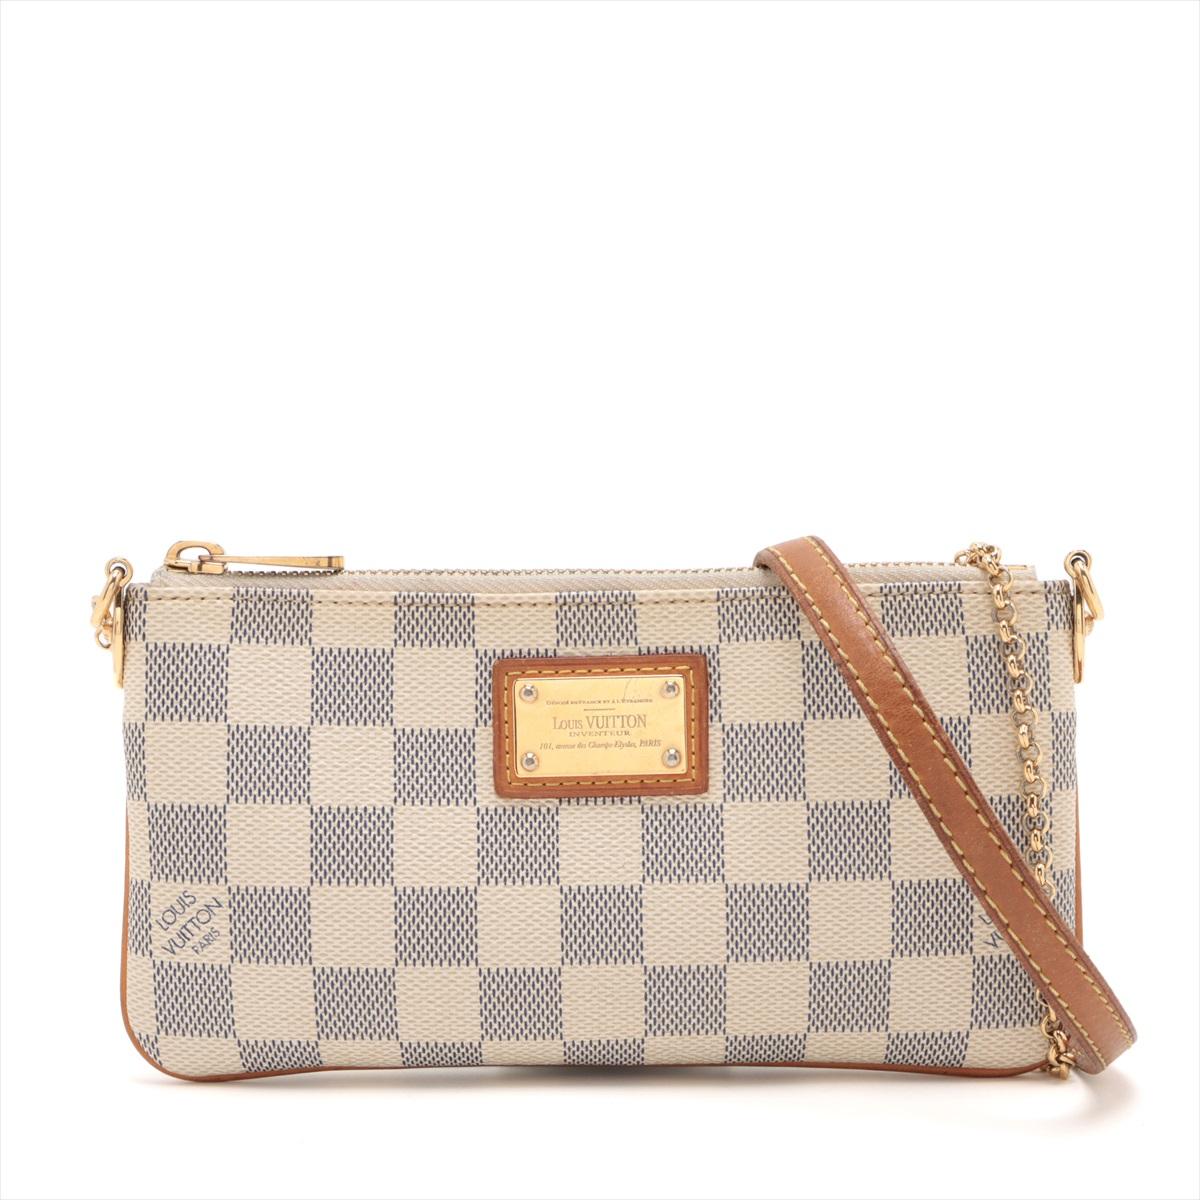 The Louis Vuitton Damier Azur Pochette Milla MM is a stylish and versatile accessory crafted from the brand's iconic Damier Azur canvas. With its compact yet practical design, the pochette is perfect for carrying essentials on the go. The light and